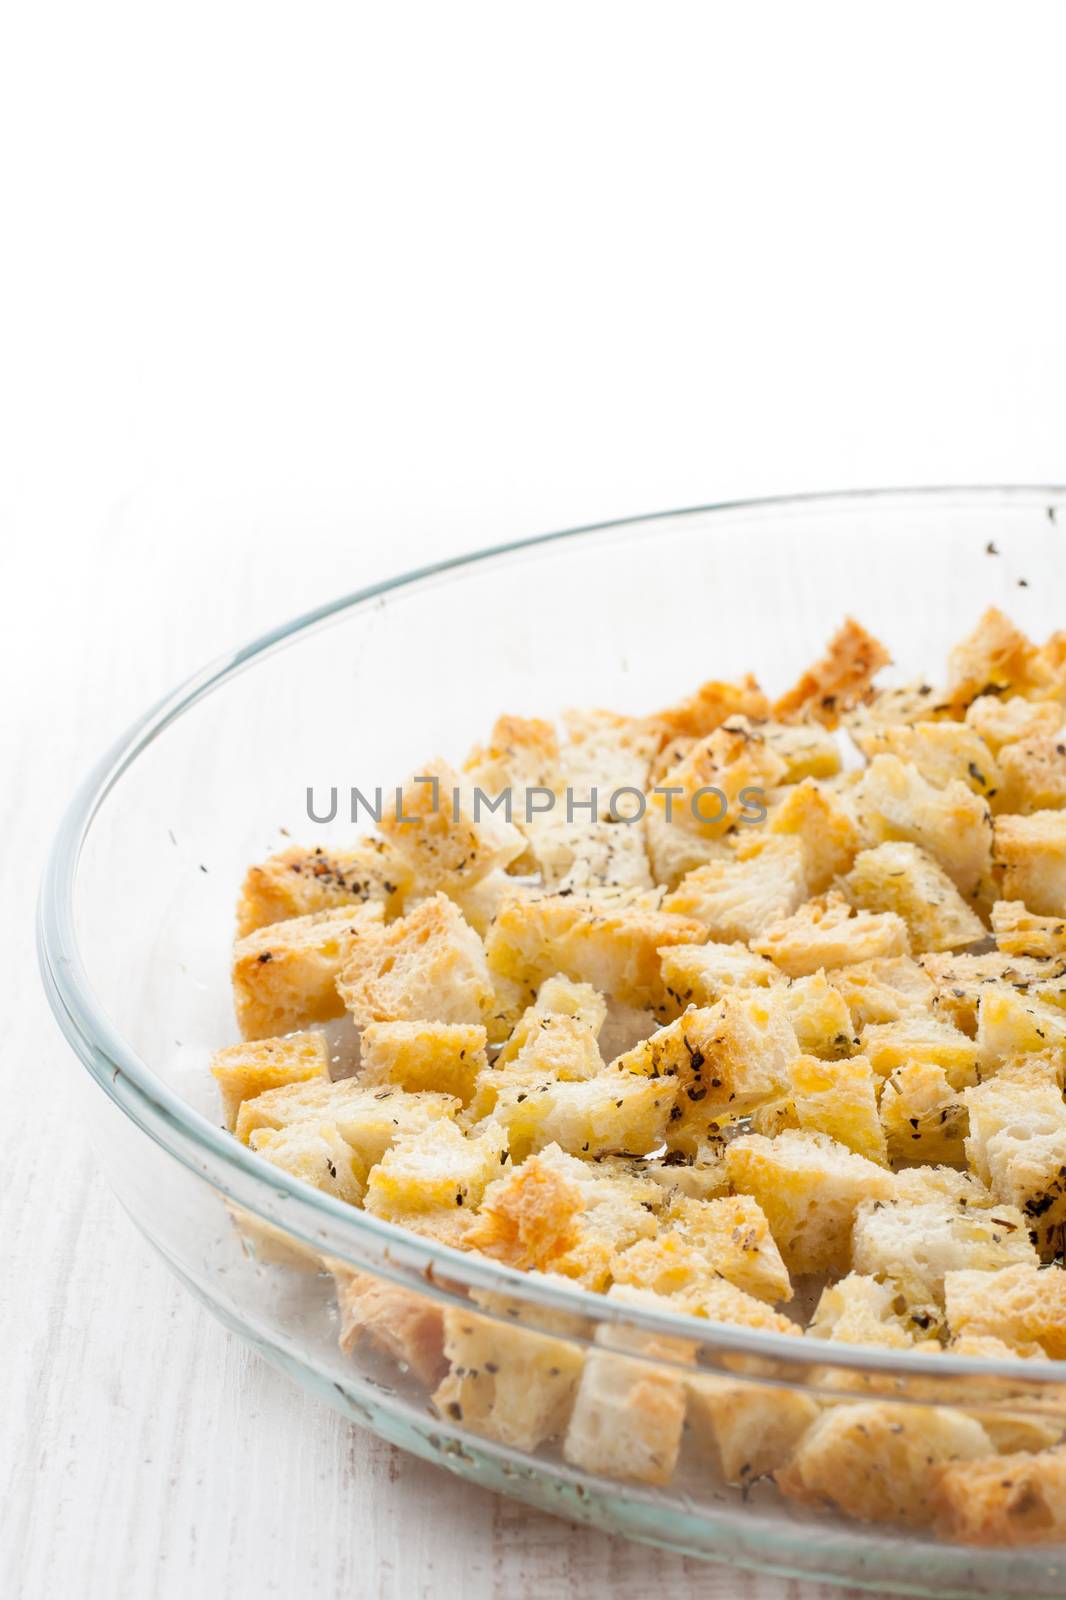 Small croutons with pepper  on the glass  dish at  the right of the table